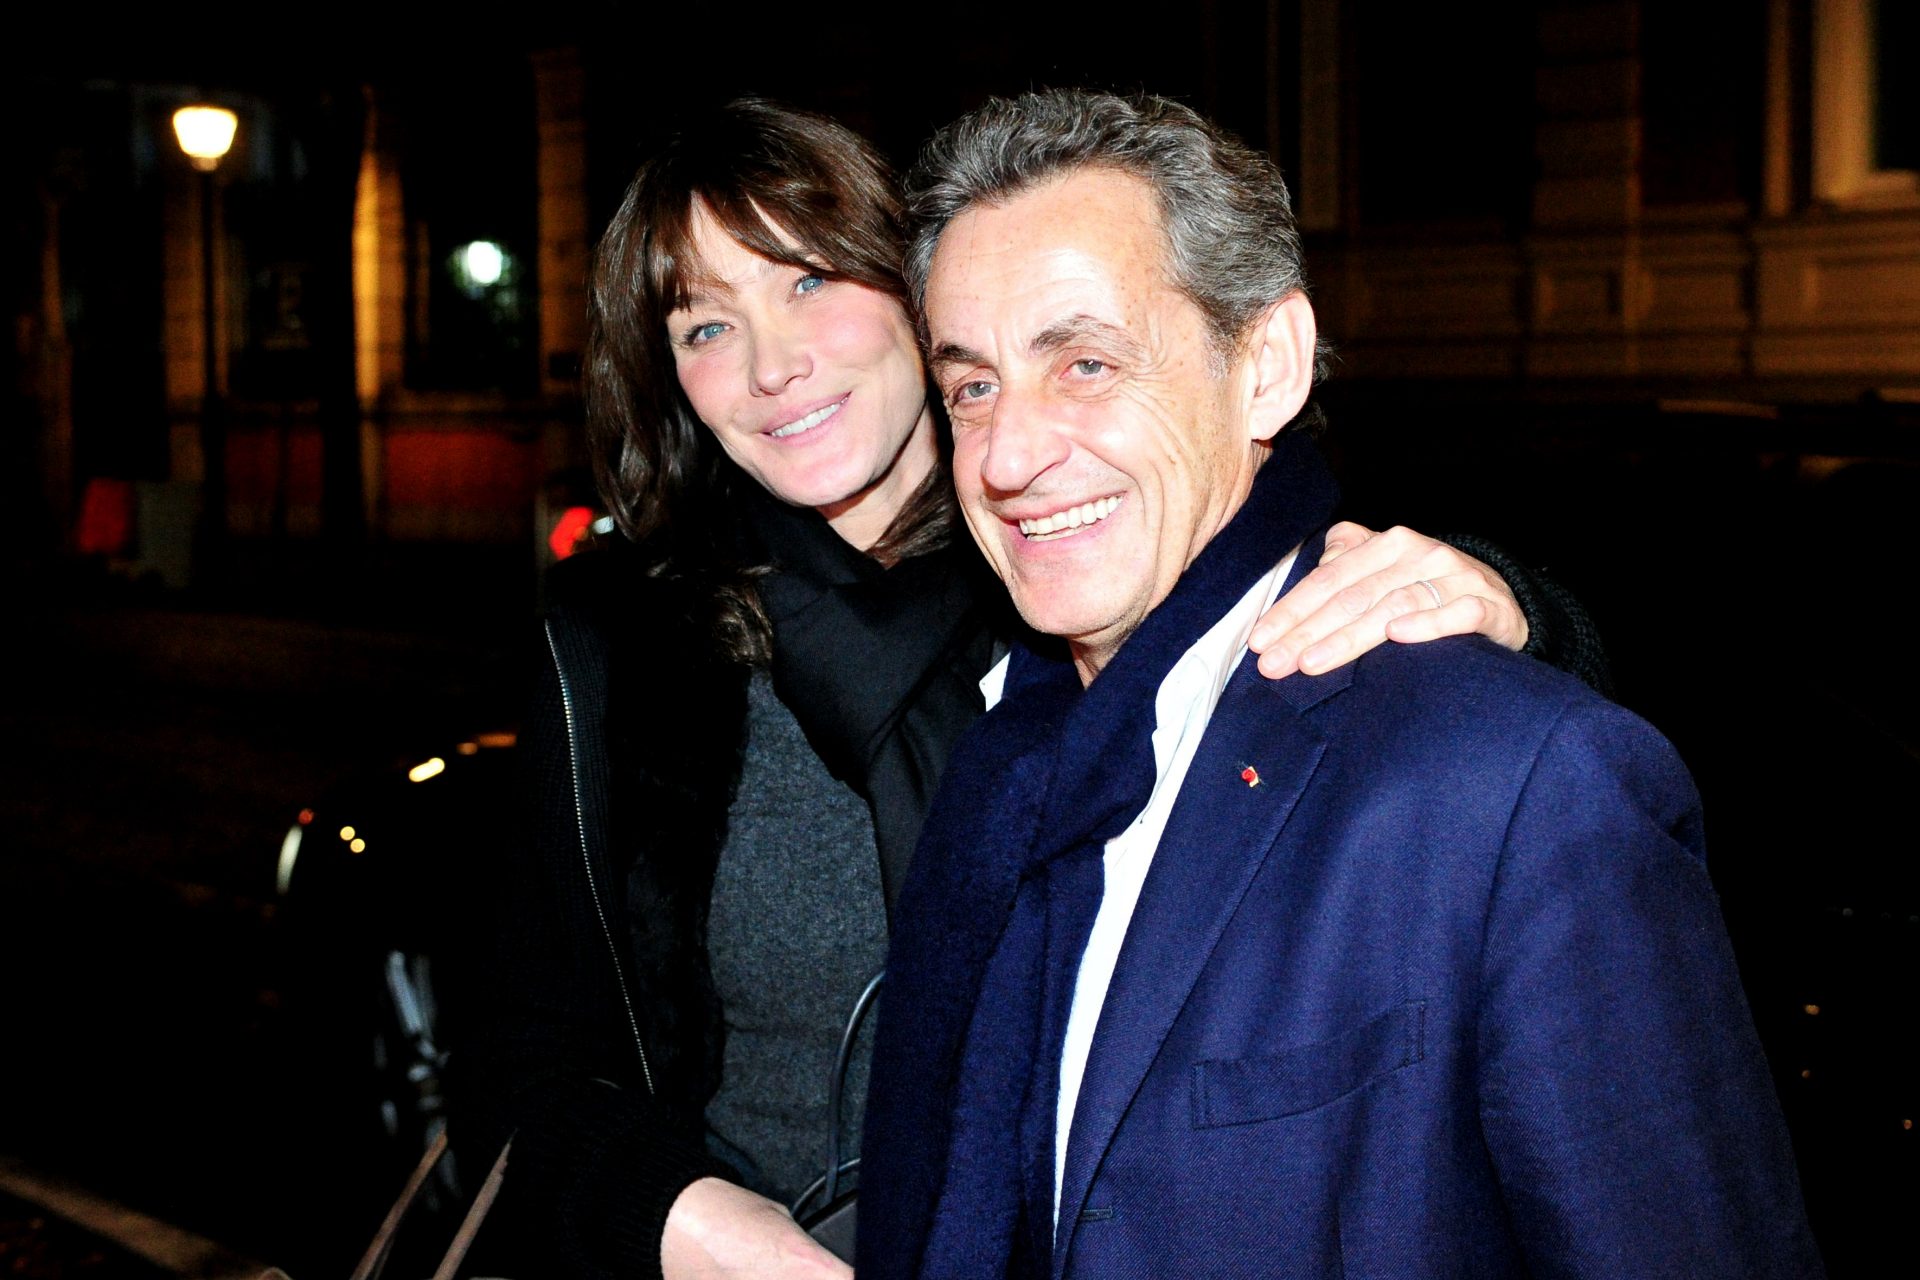 Carla Bruni Sarkozy stands by her man